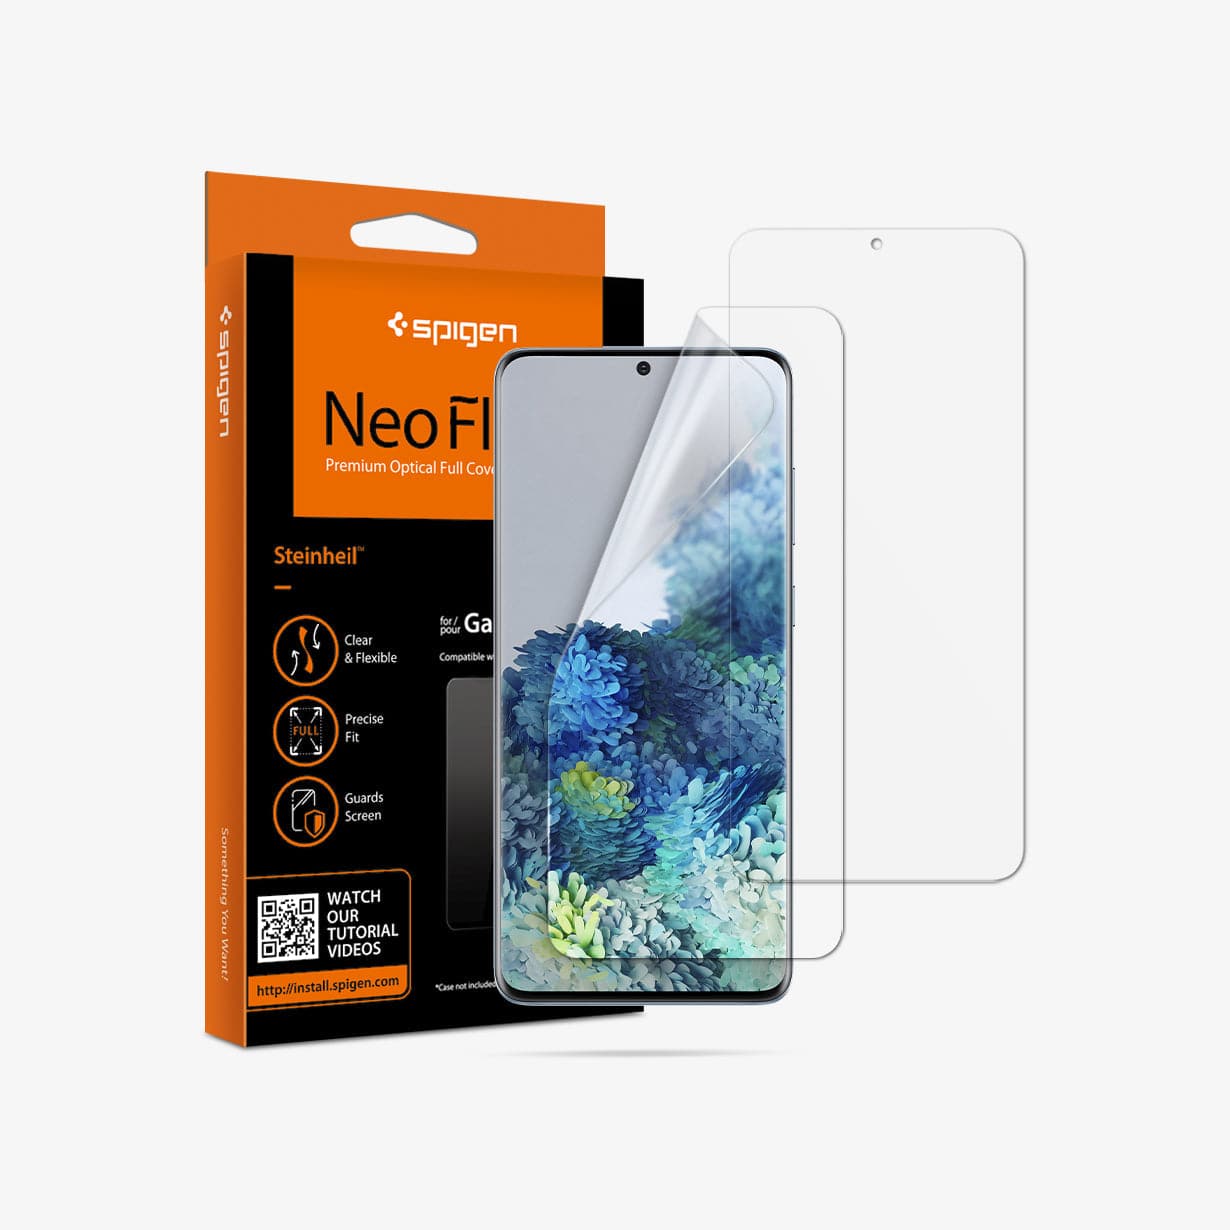 AFL00644 - Galaxy S20 Plus Neo Flex Solid HD Screen Protector showing the device, two screen protectors and packaging